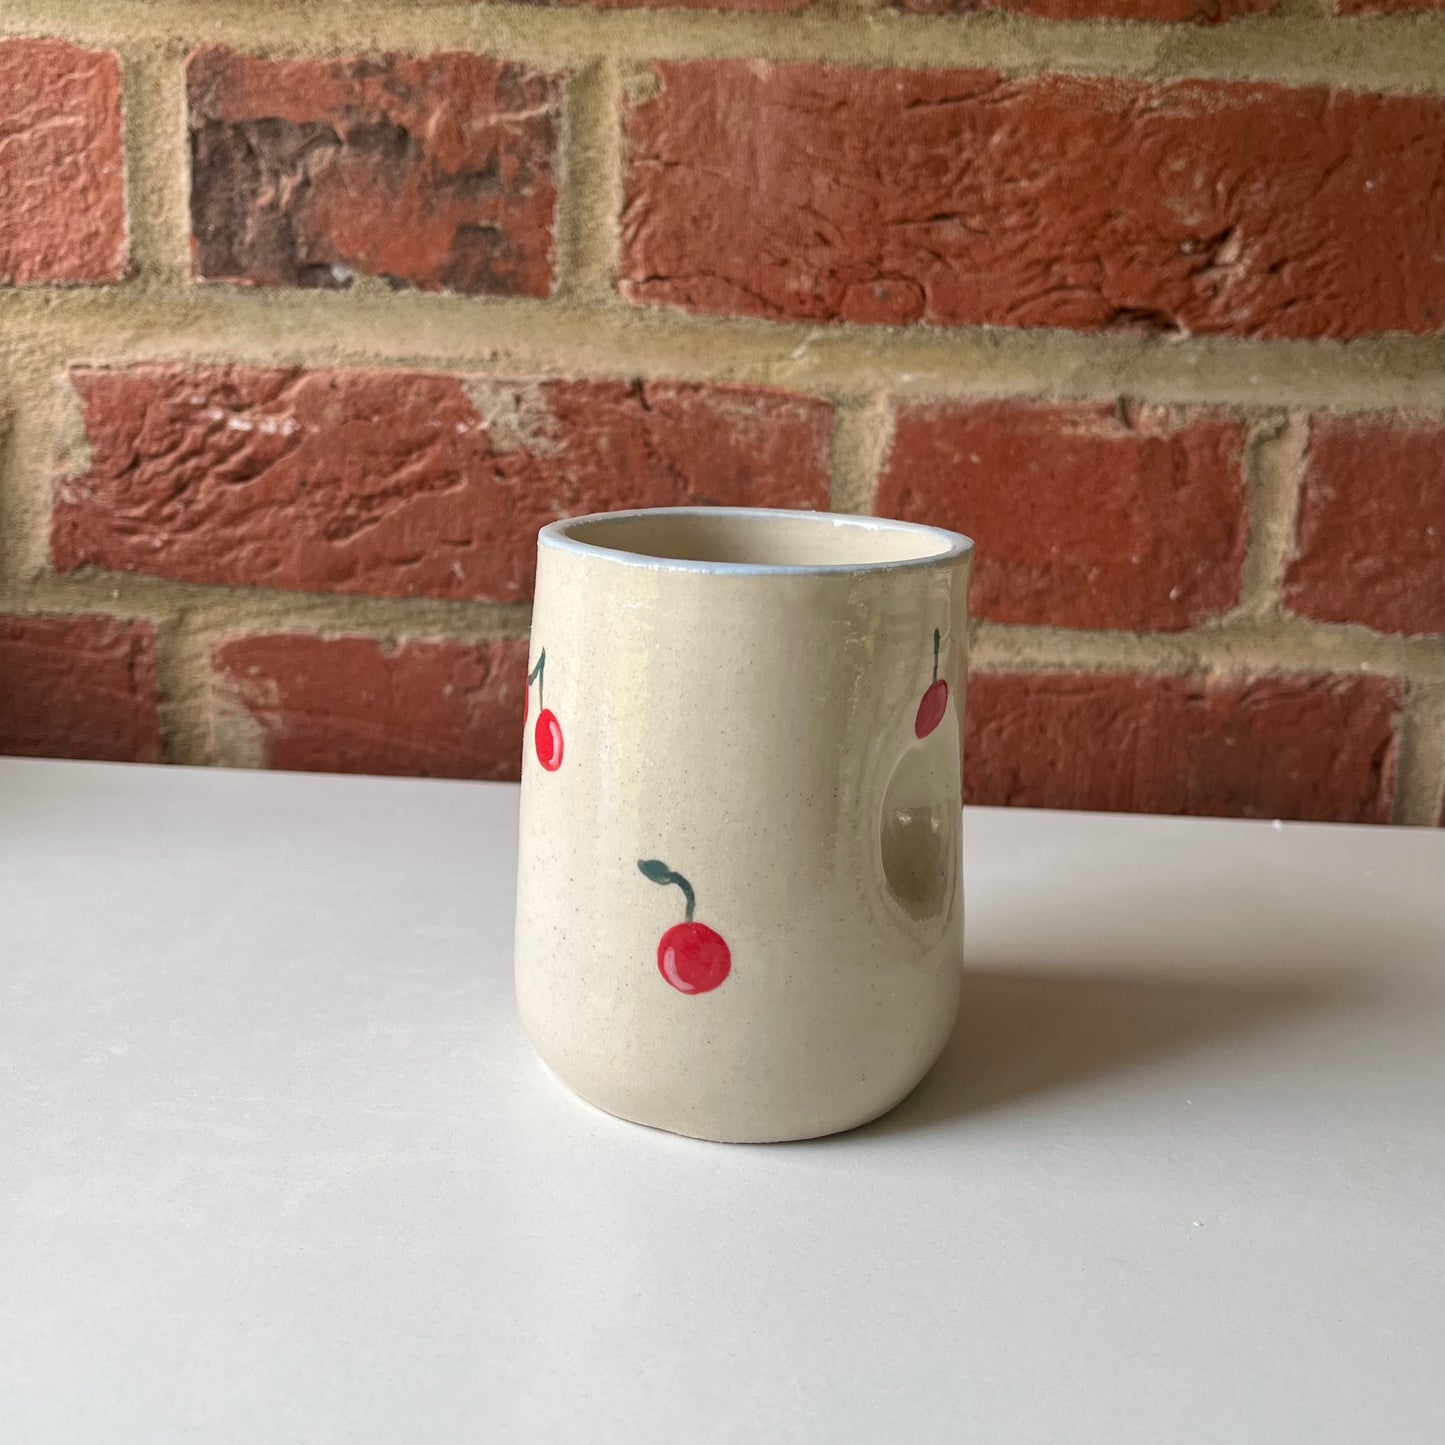 Slightly Imperfect Cherry cup